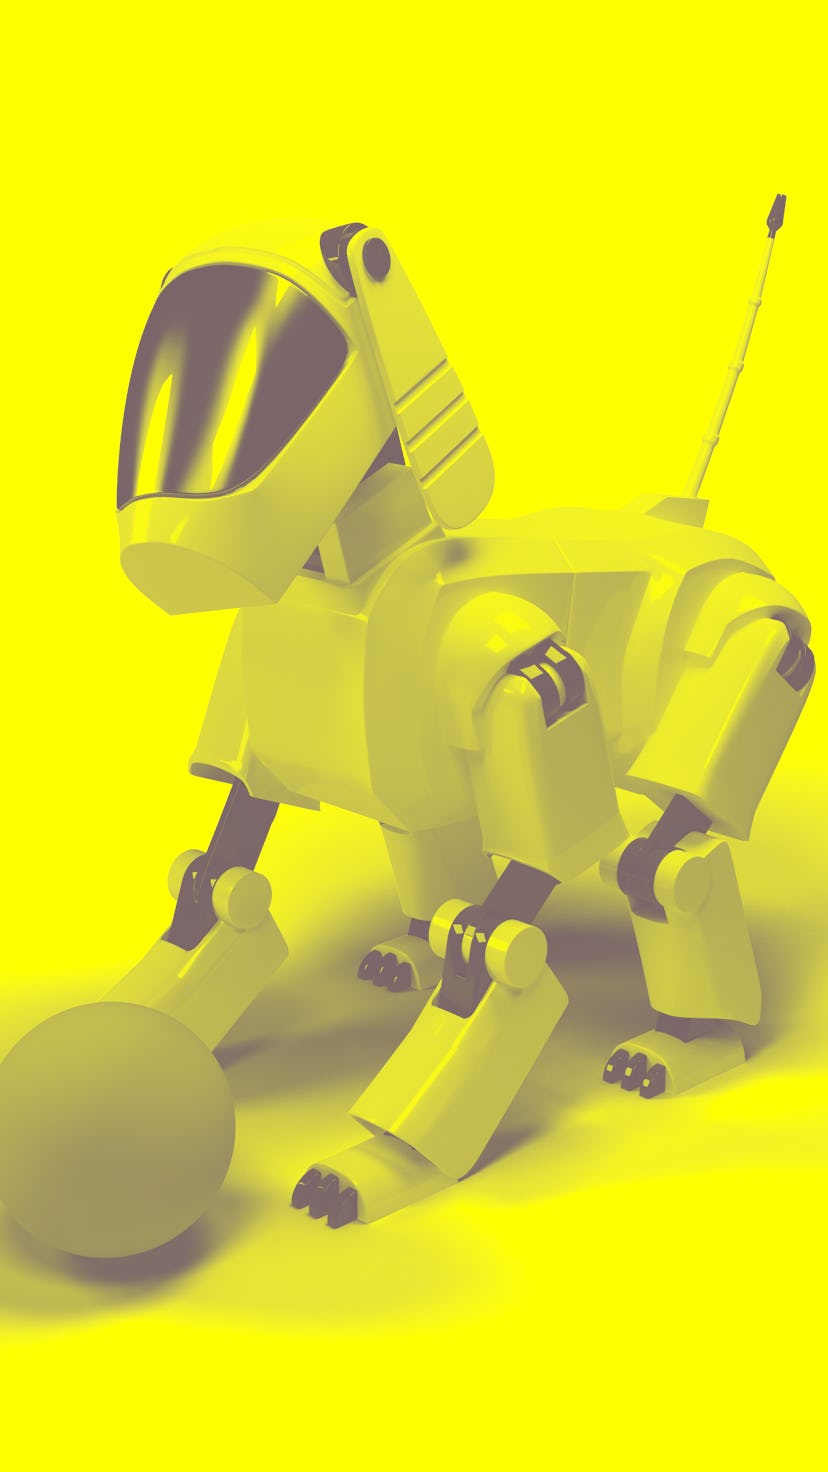 Robot dog from the white plastic play with pink ball on a white background